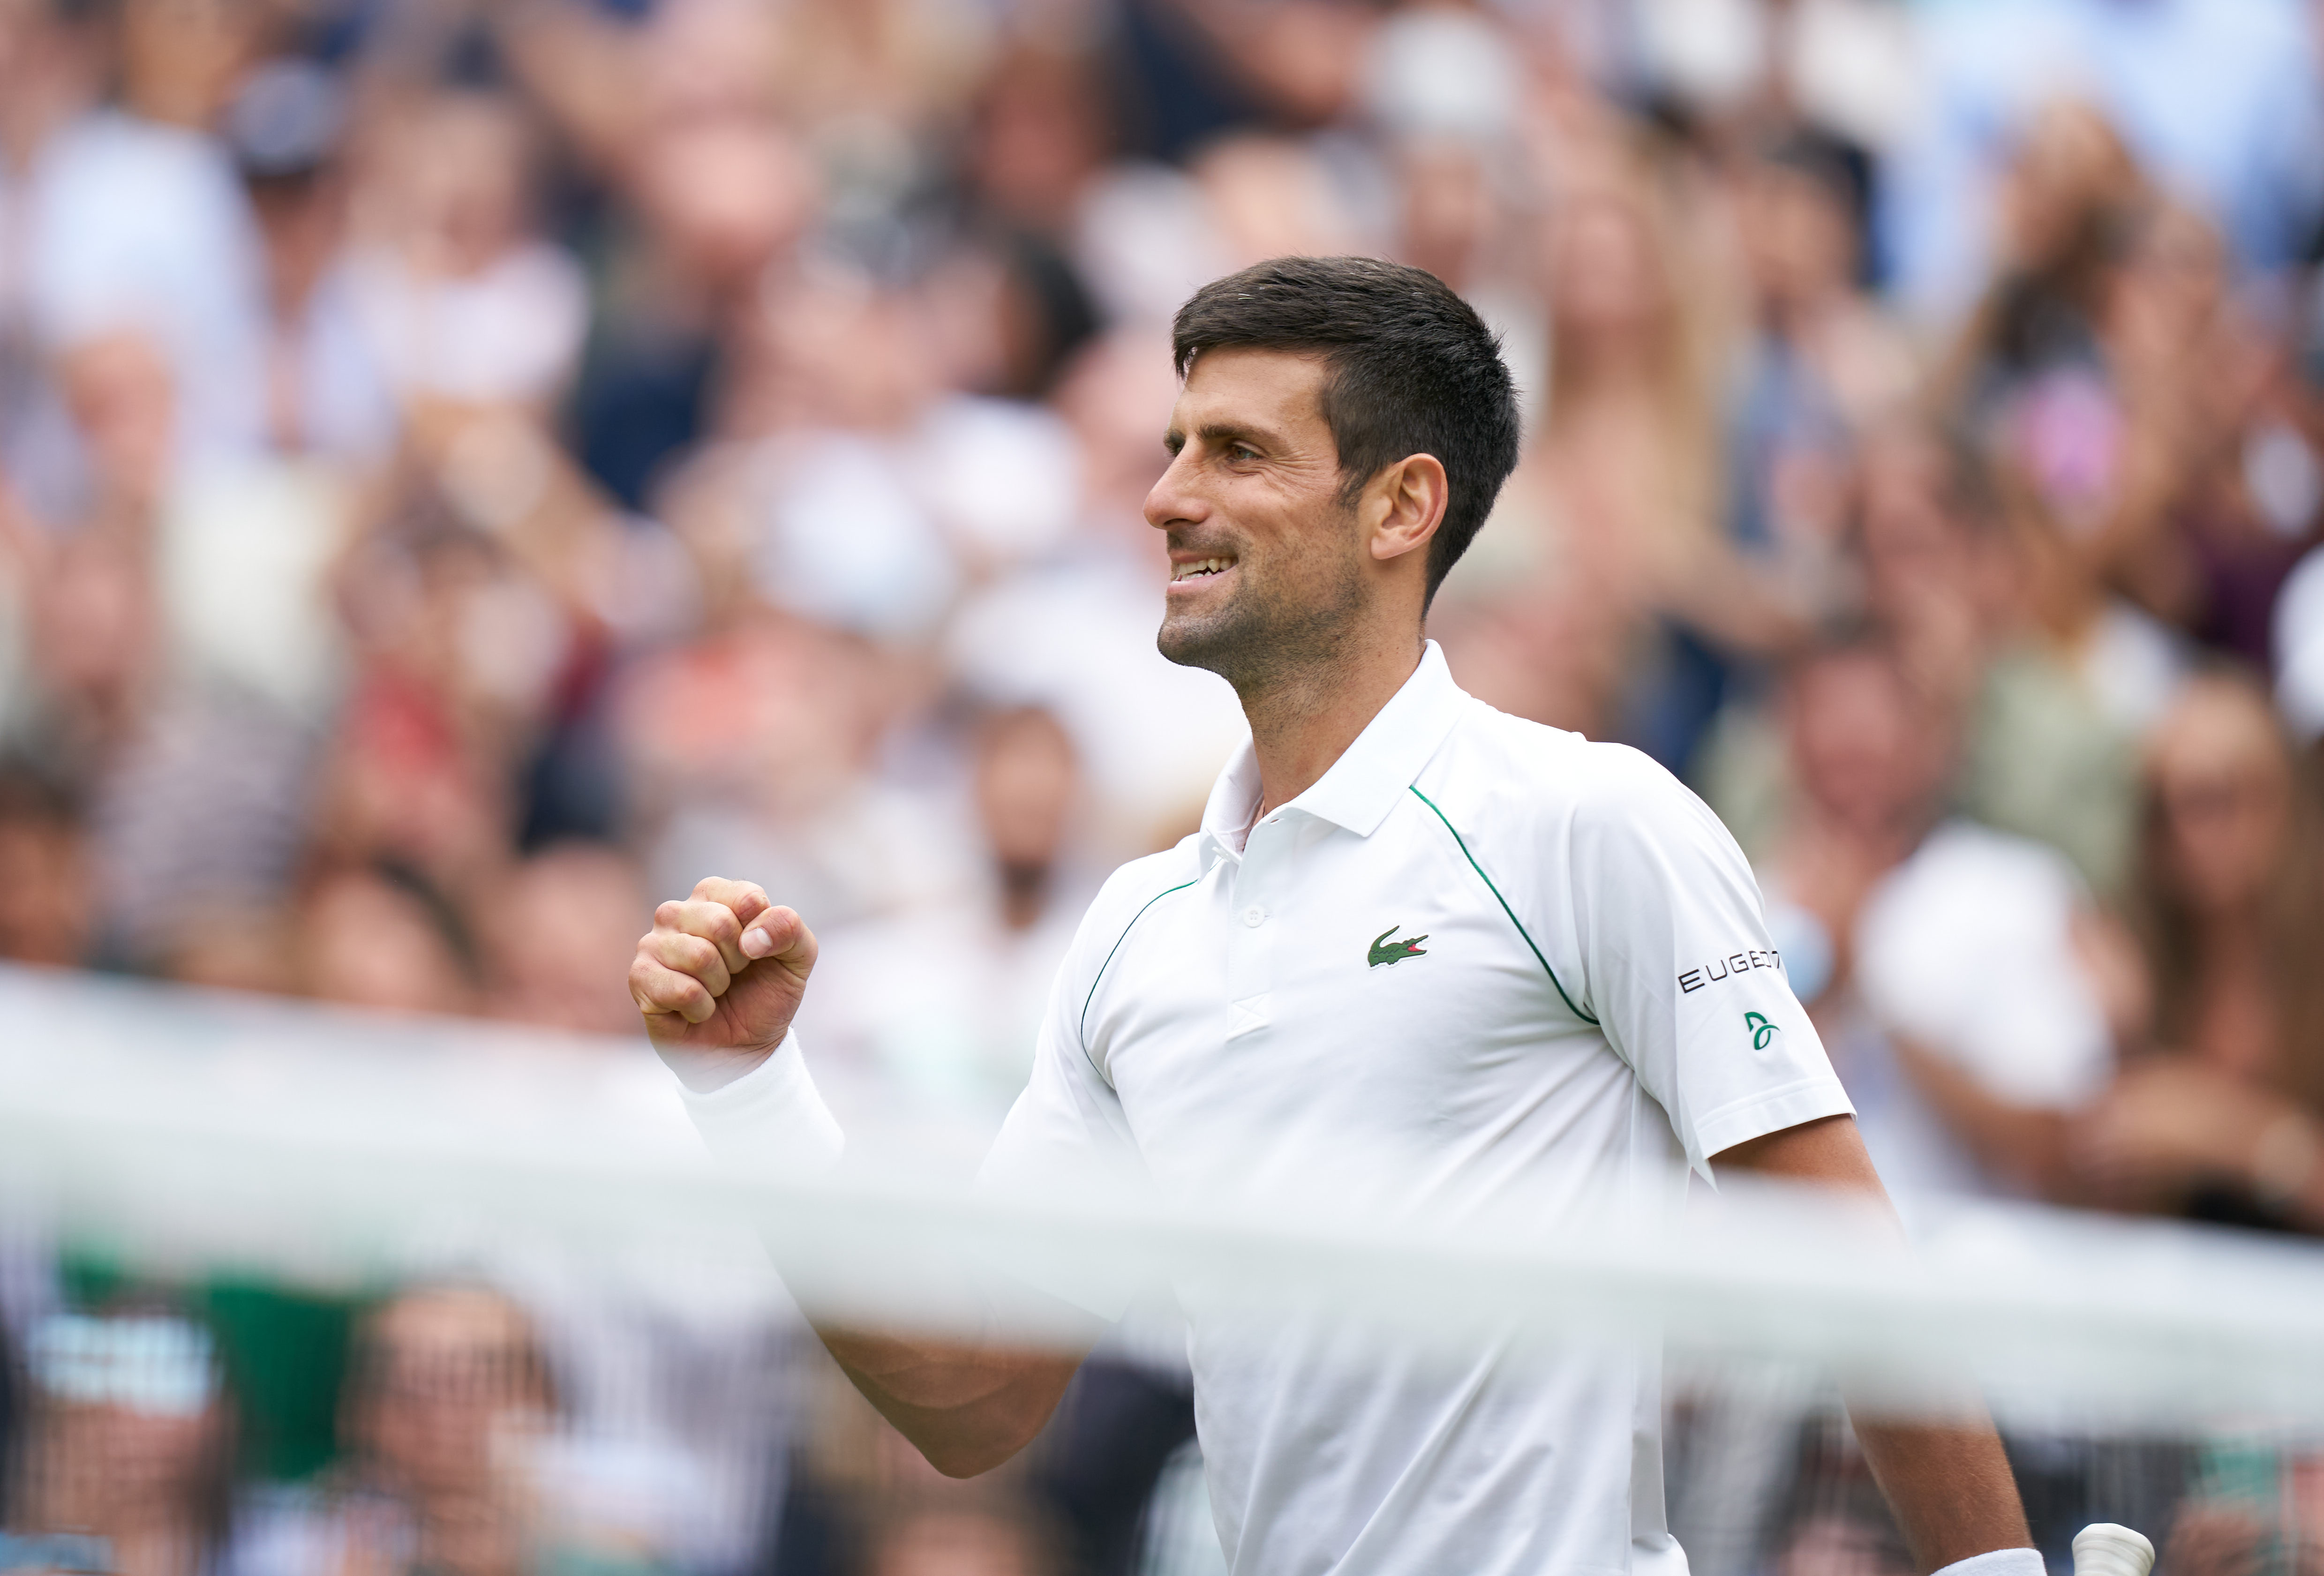 Castle tipping Djokovic to equal Grand Slam record